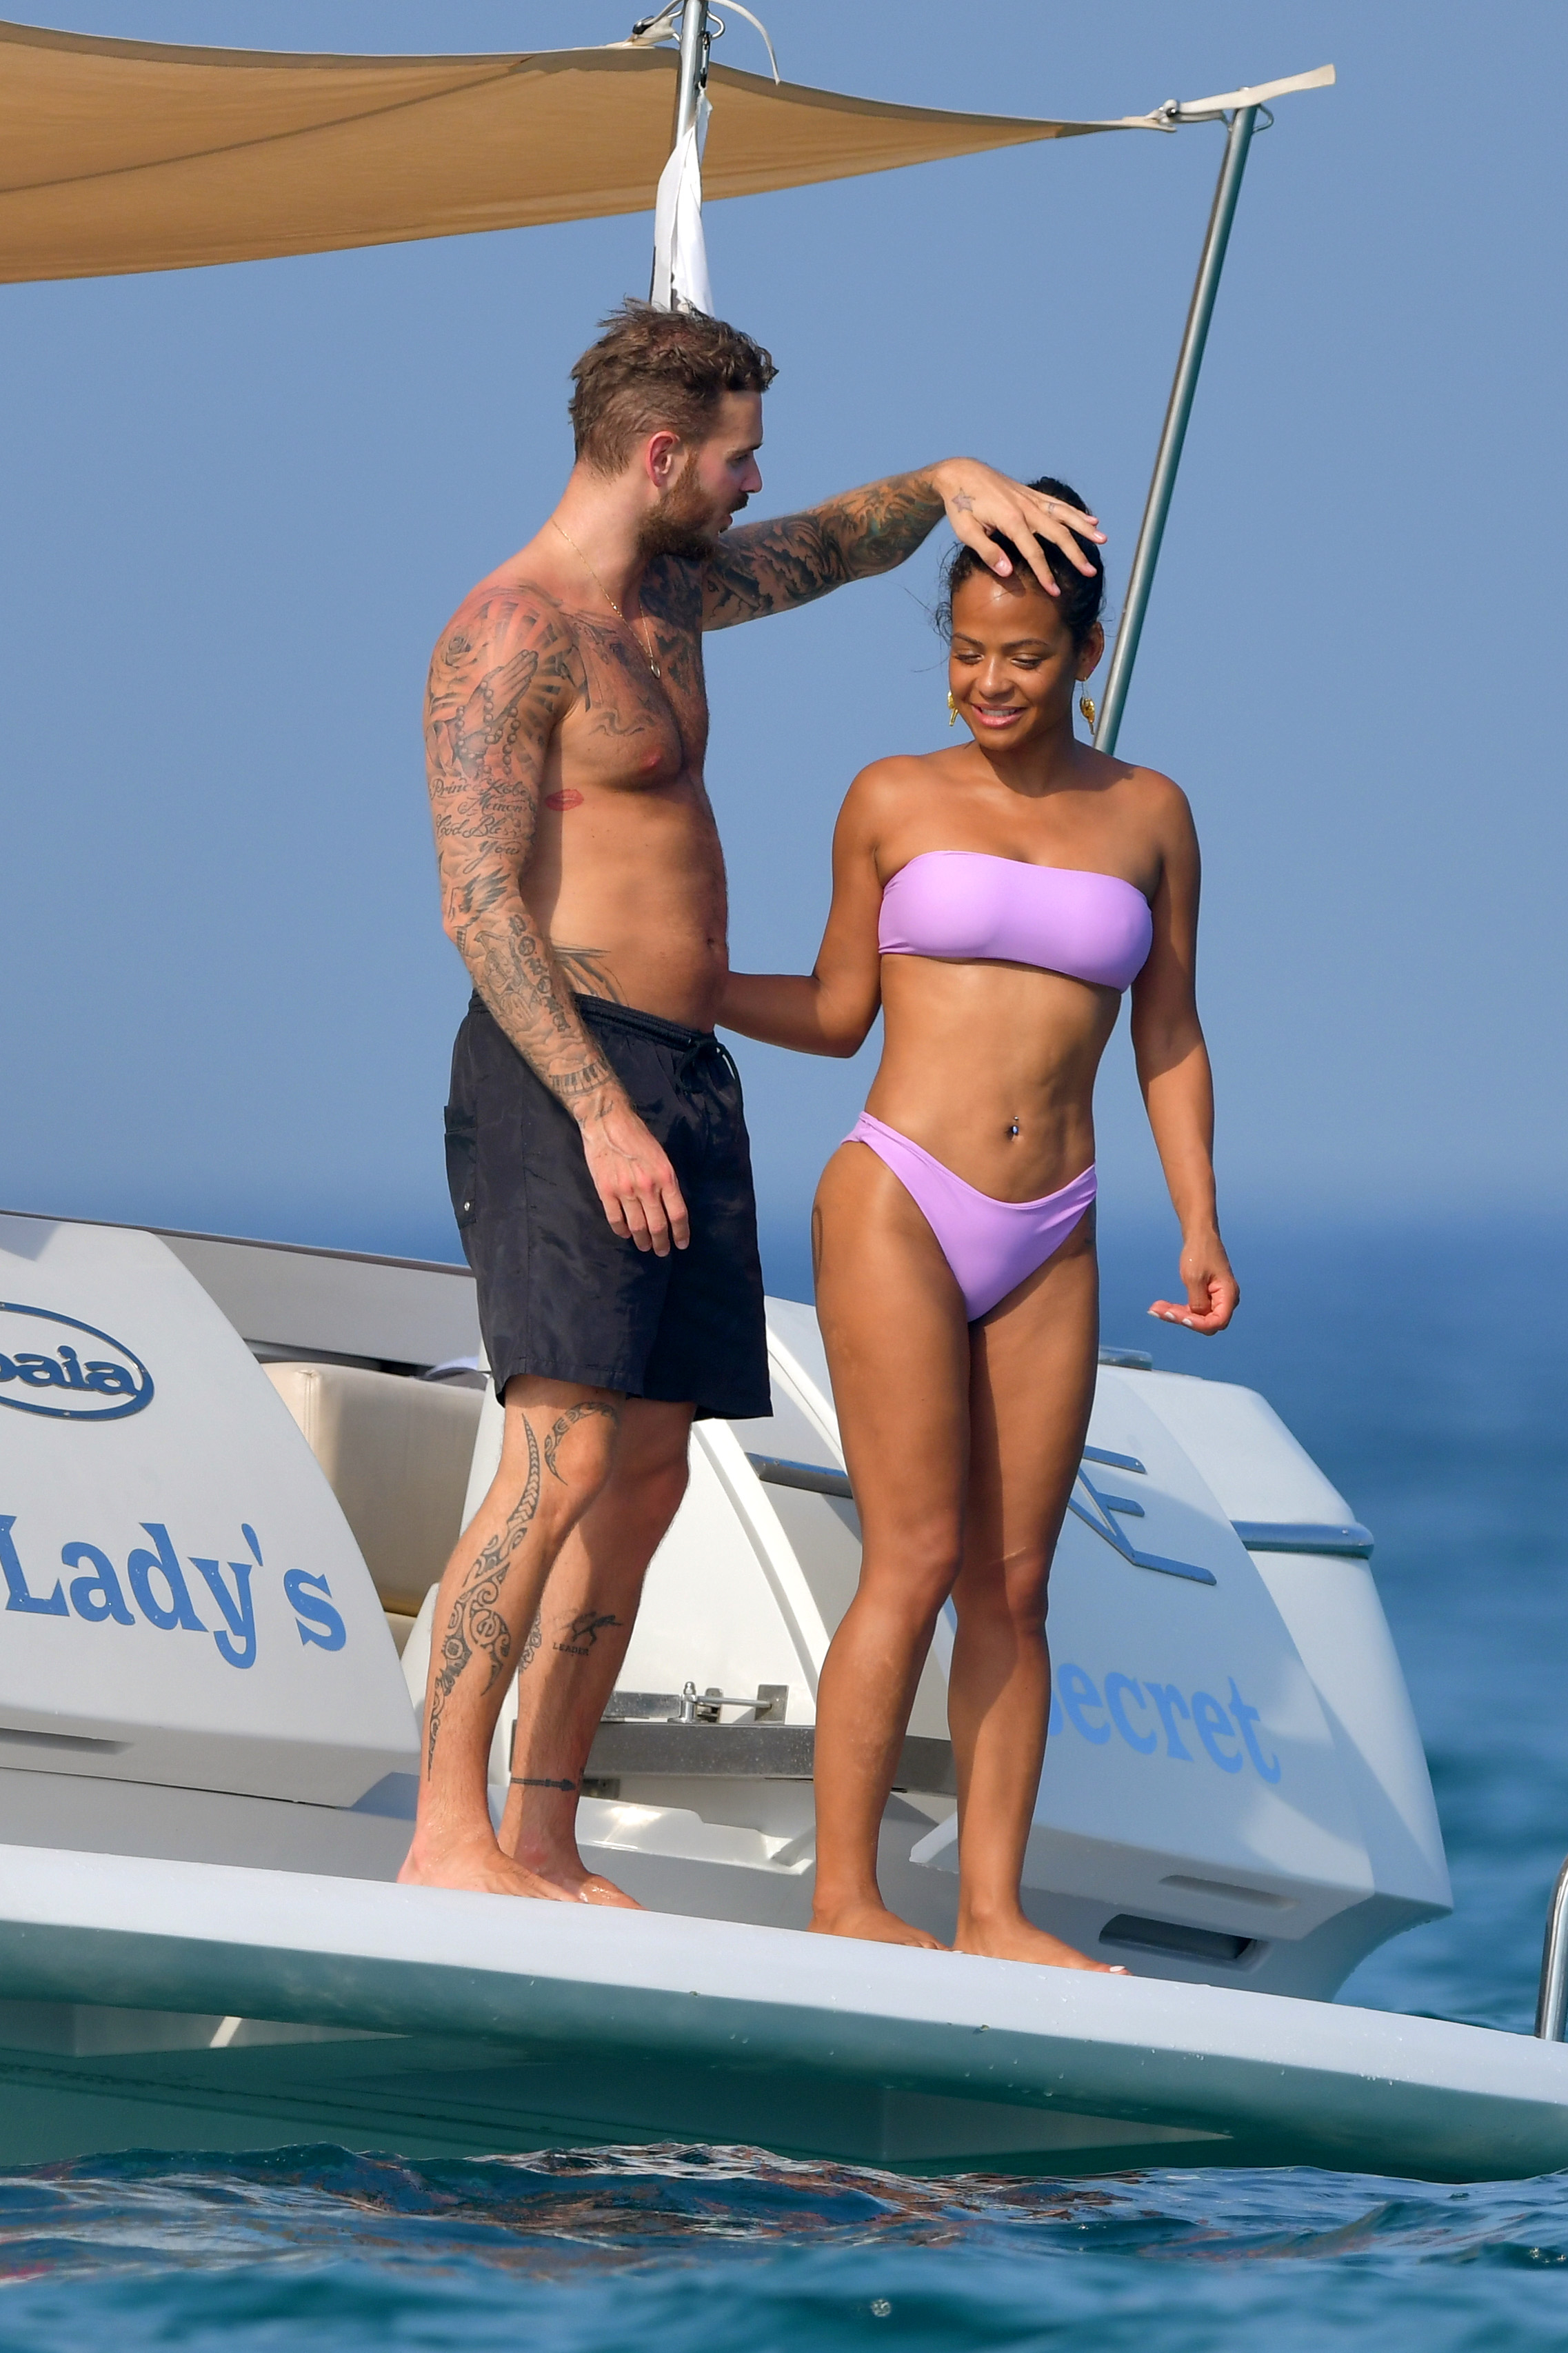 Christina Milian pokies and cameltoe in sexy bikini candids on a boat during holiday UHQ (21).jpg